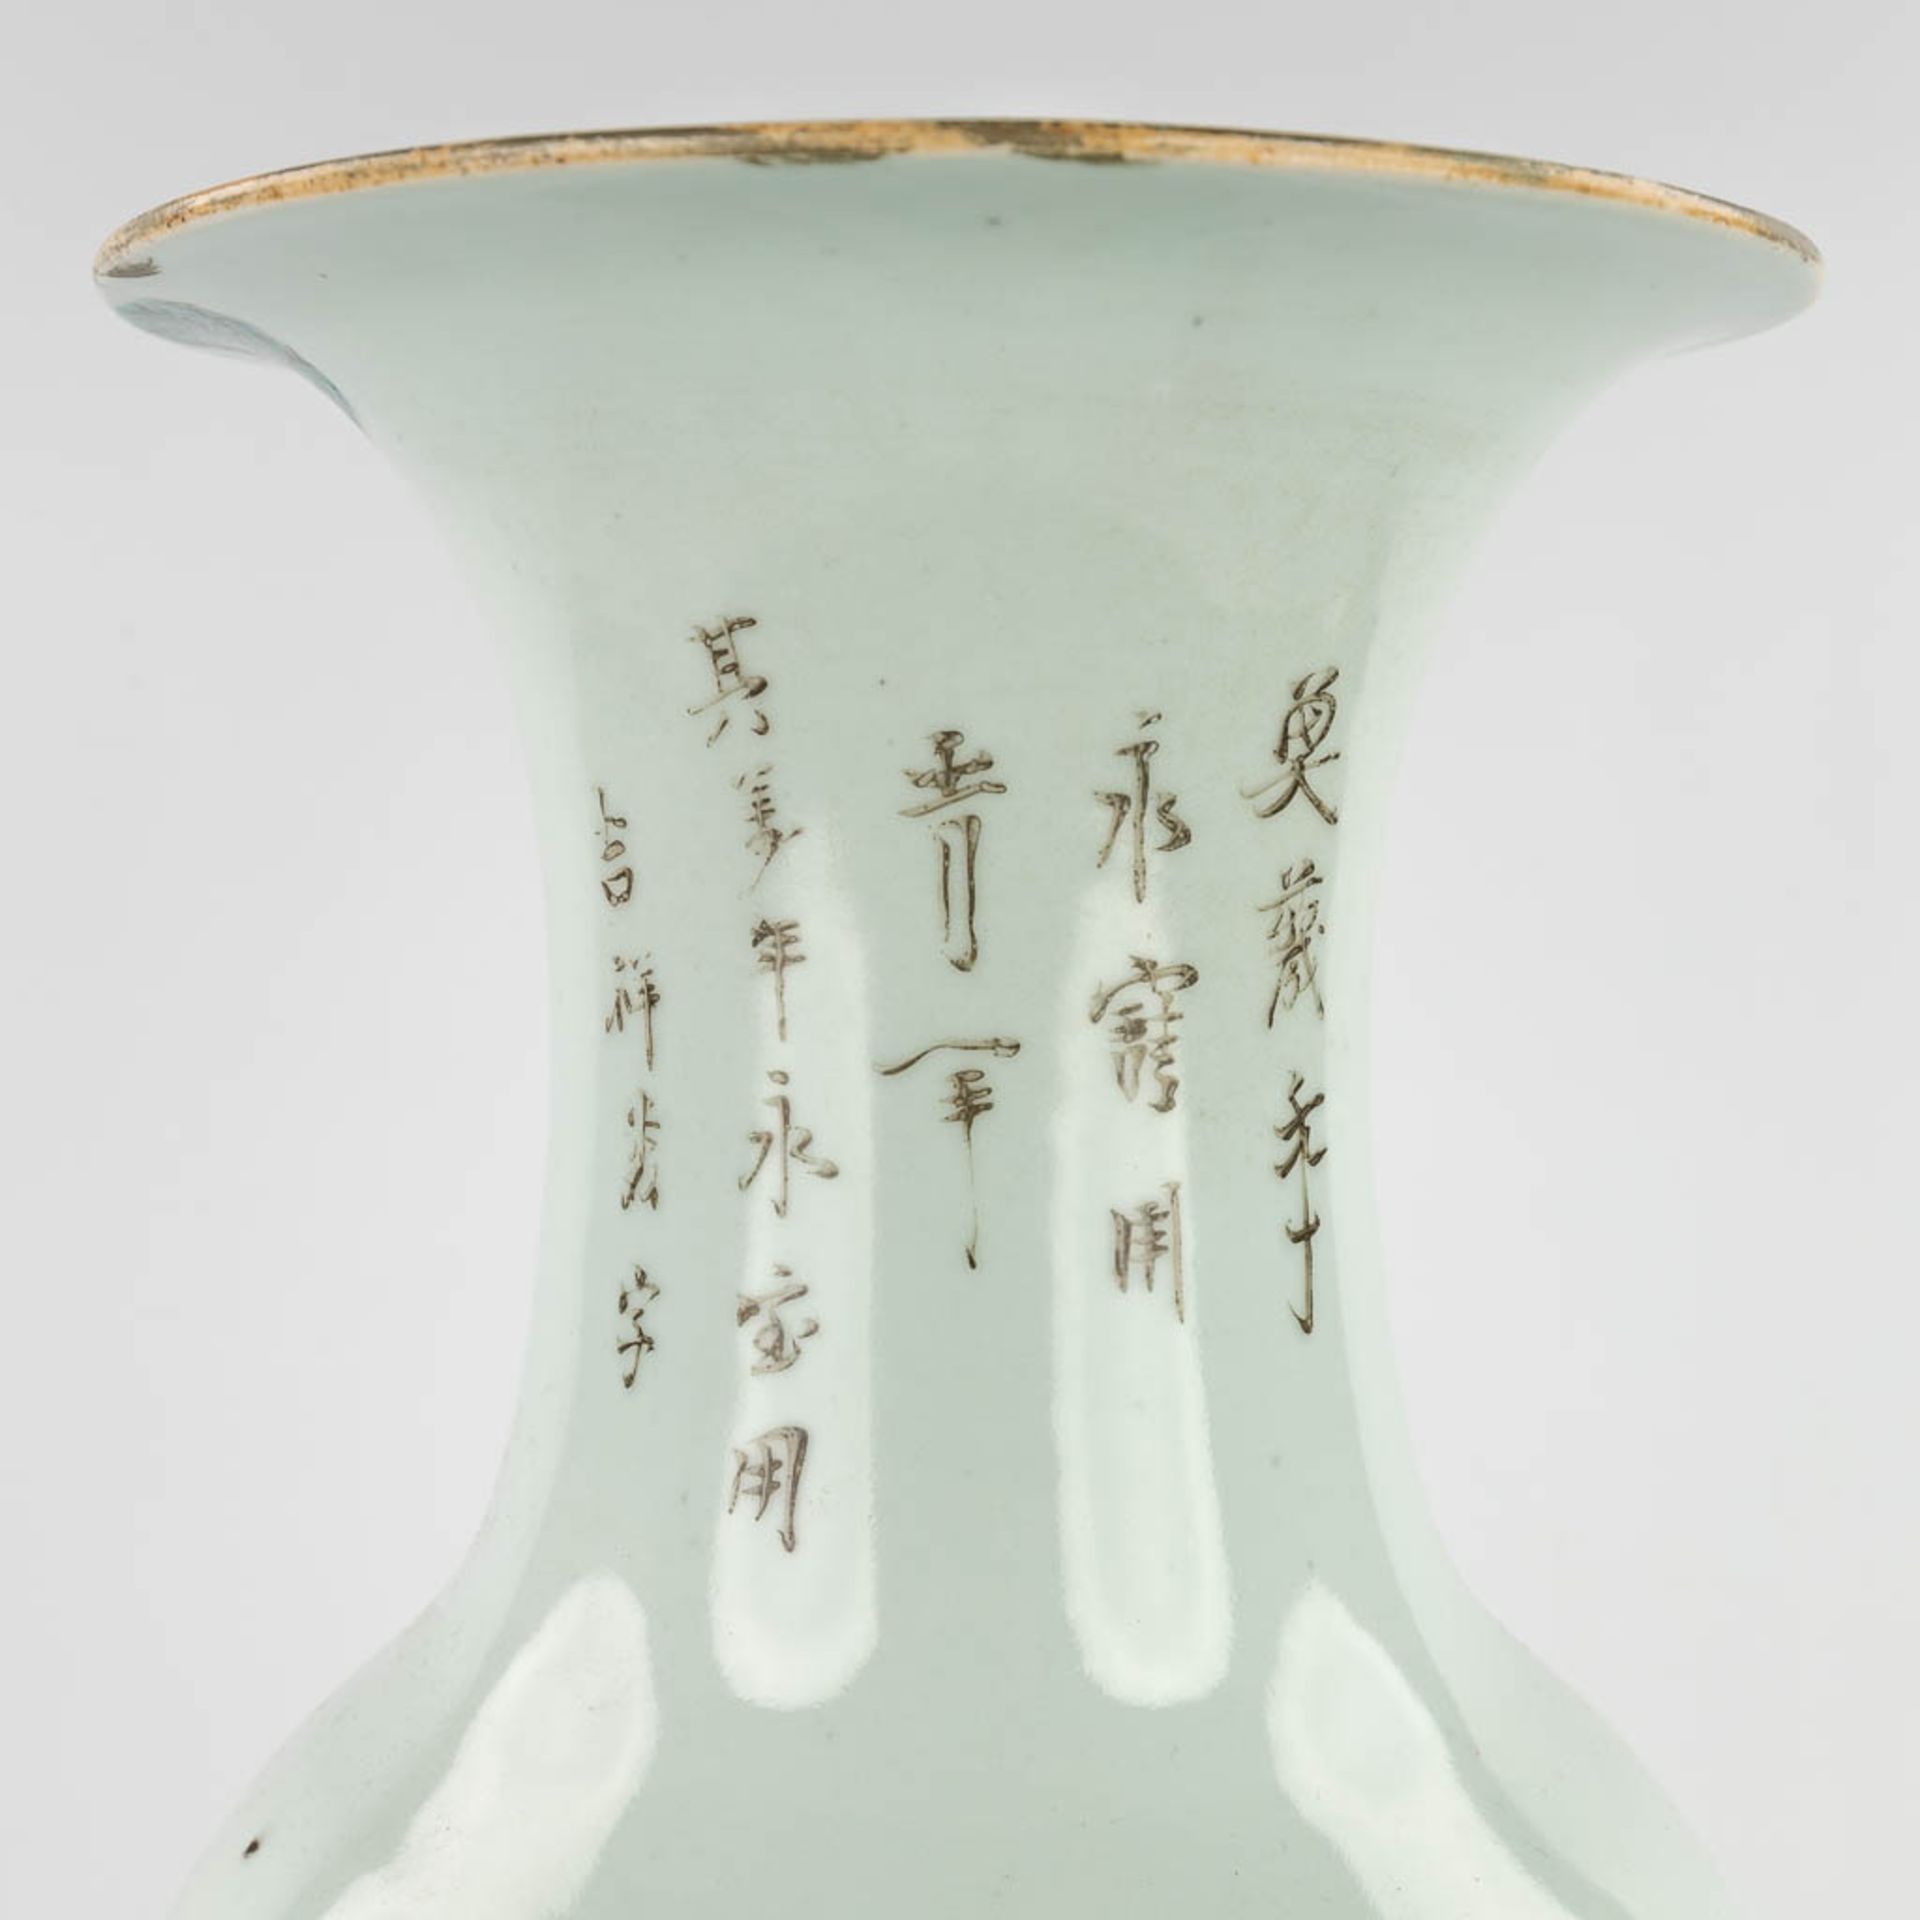 A Chinese vase, decorated with ladies and an emperor. 19th/20th C. (H:57 x D:23 cm) - Image 12 of 14